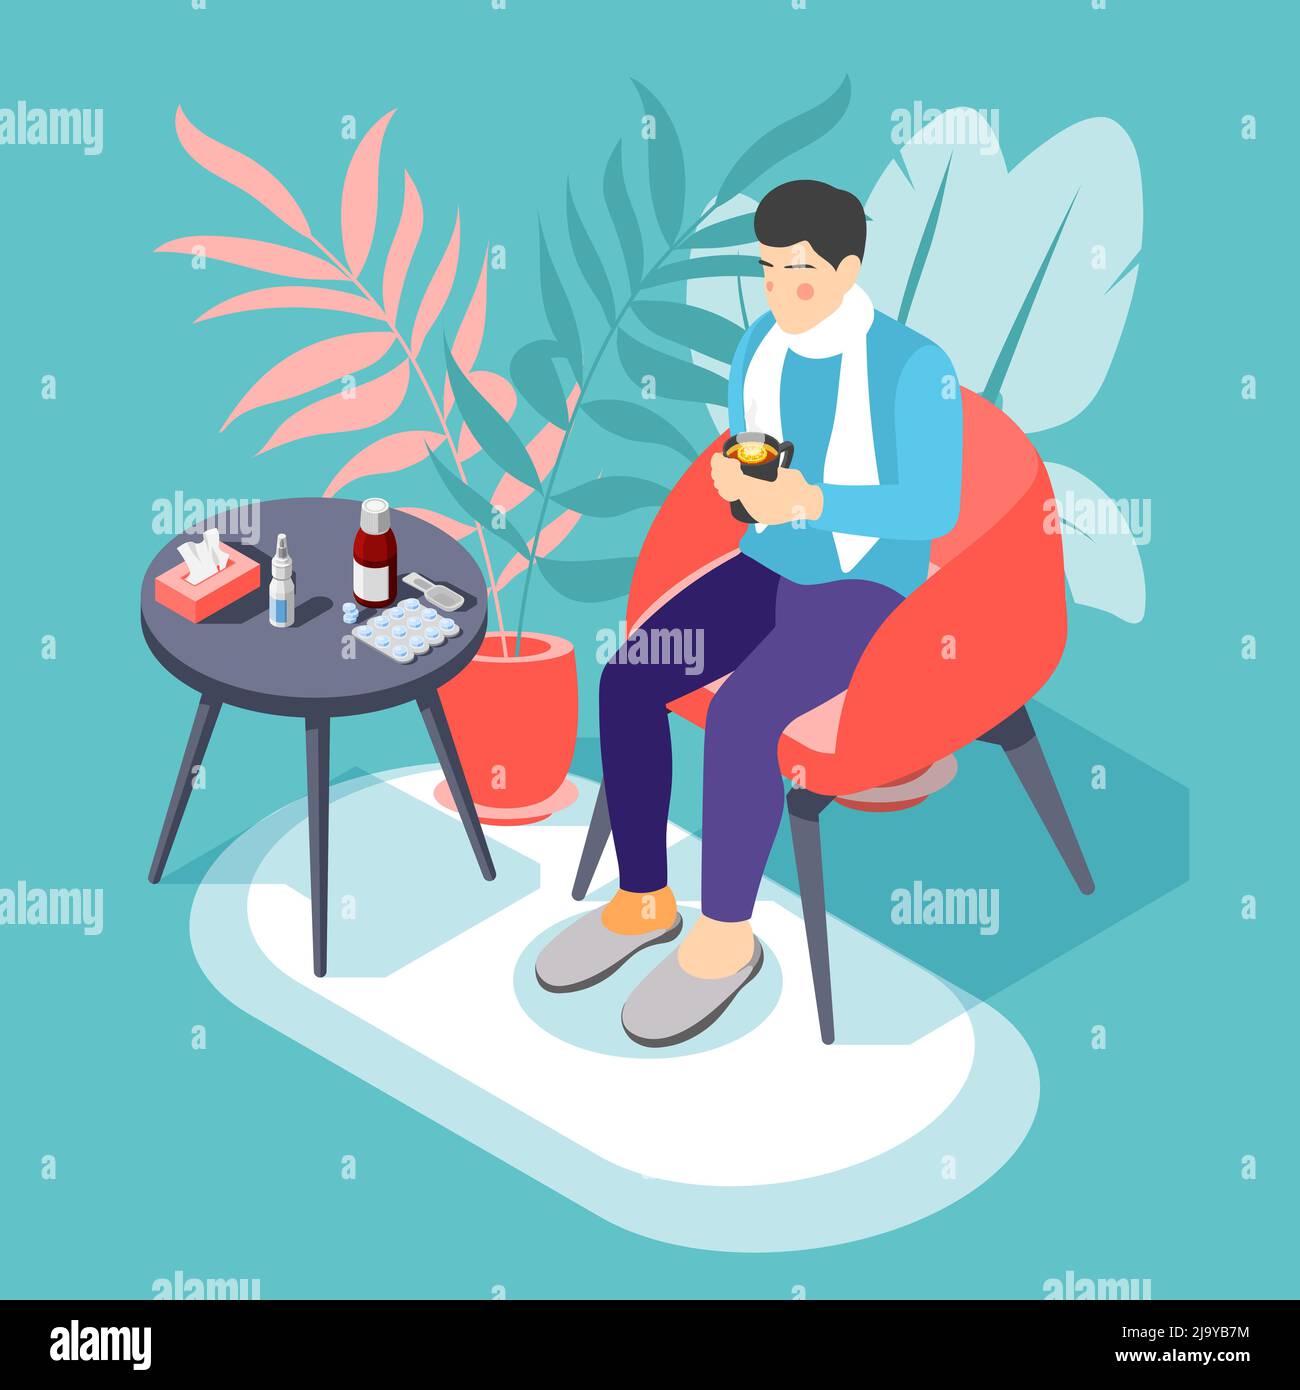 Sick man with flu cold sore throat sitting in armchair with hot drink isometric background vector illustration Stock Vector